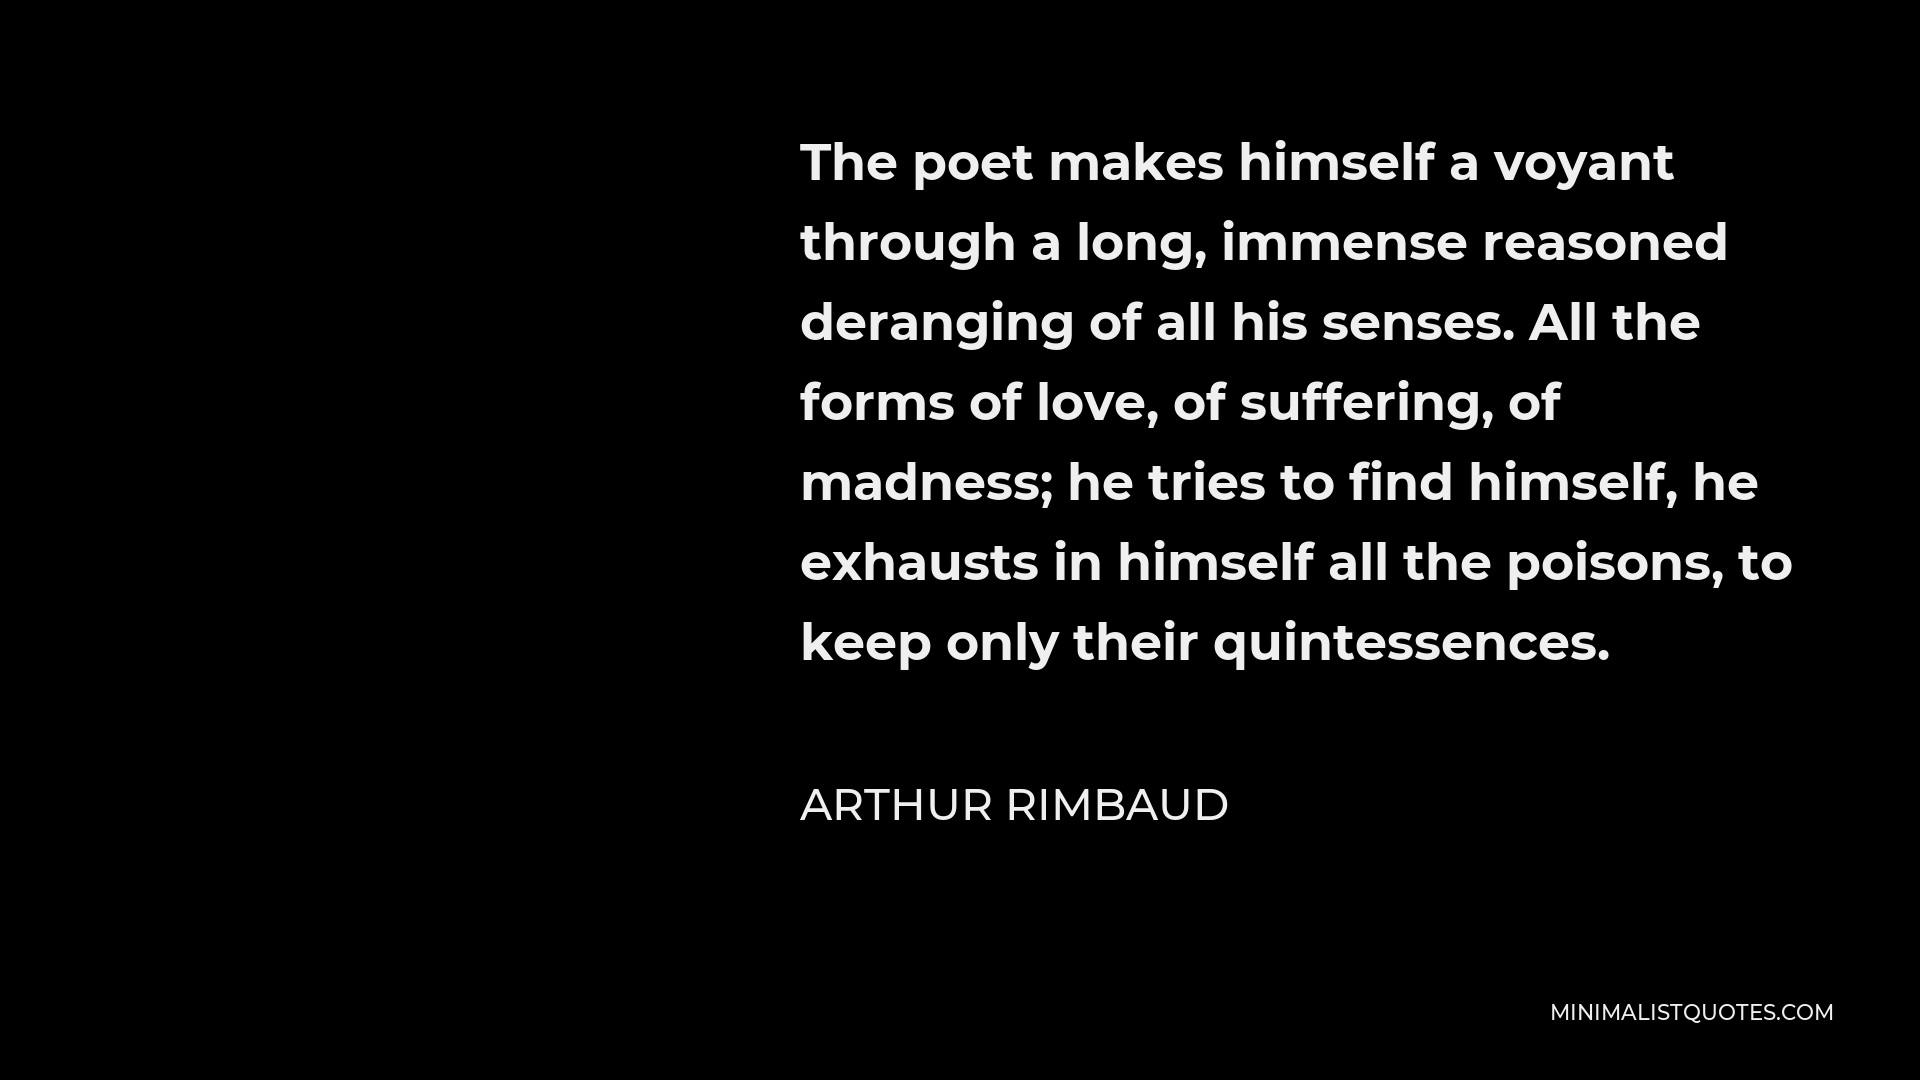 Arthur Rimbaud Quote - The poet makes himself a voyant through a long, immense reasoned deranging of all his senses. All the forms of love, of suffering, of madness; he tries to find himself, he exhausts in himself all the poisons, to keep only their quintessences.